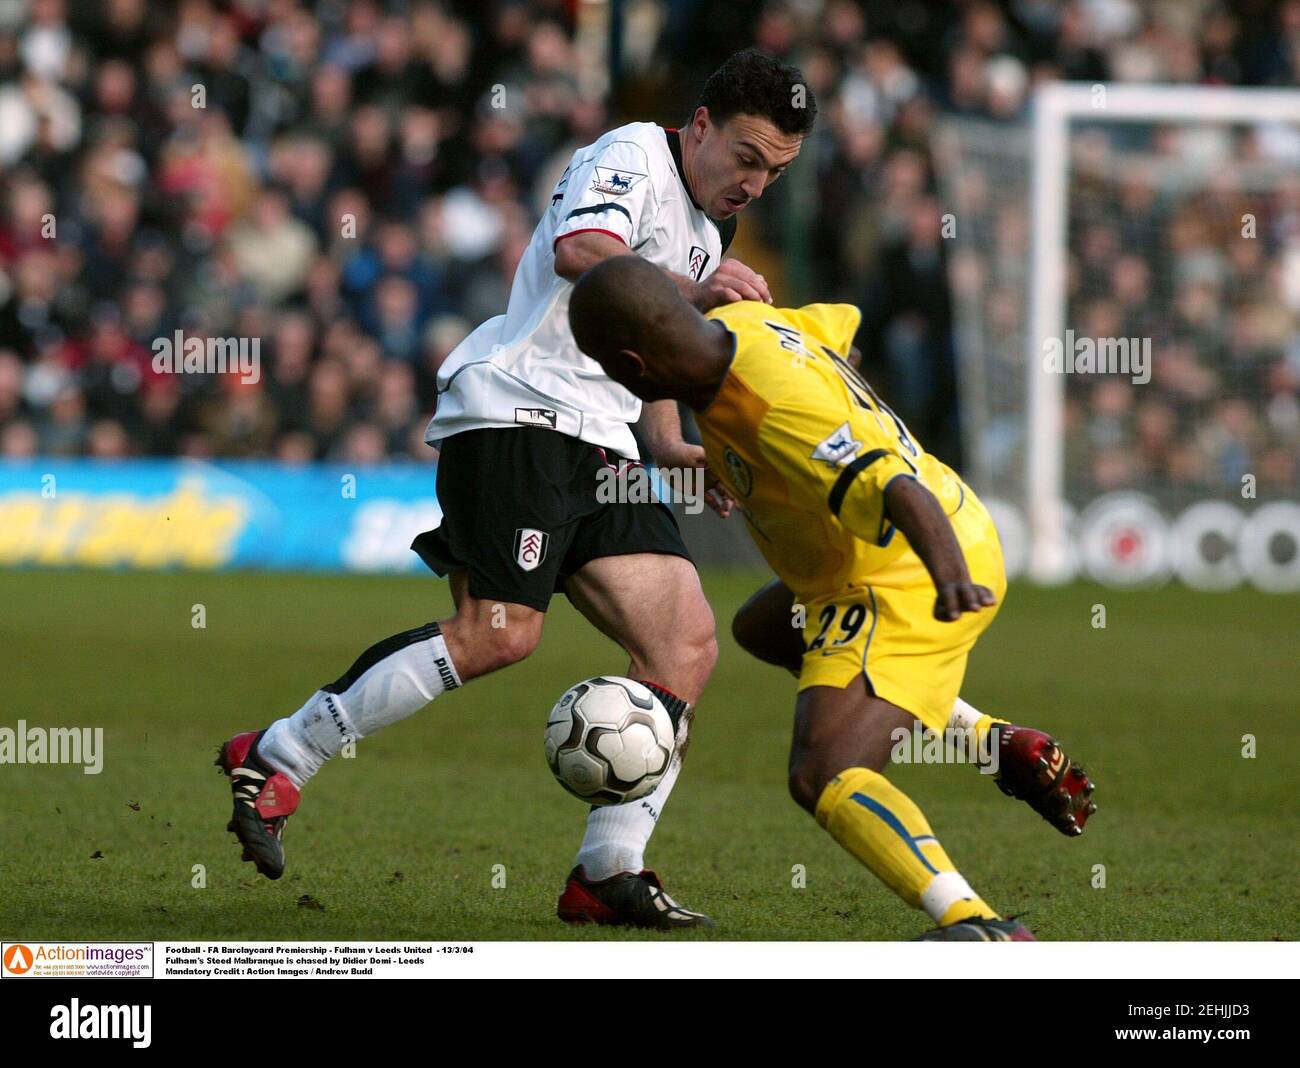 Football - FA Barclaycard Premiership - Fulham v Leeds United  - 13/3/04  Fulham's Steed Malbranque is chased by Didier Domi - Leeds  Mandatory Credit : Action Images / Andrew Budd Stock Photo